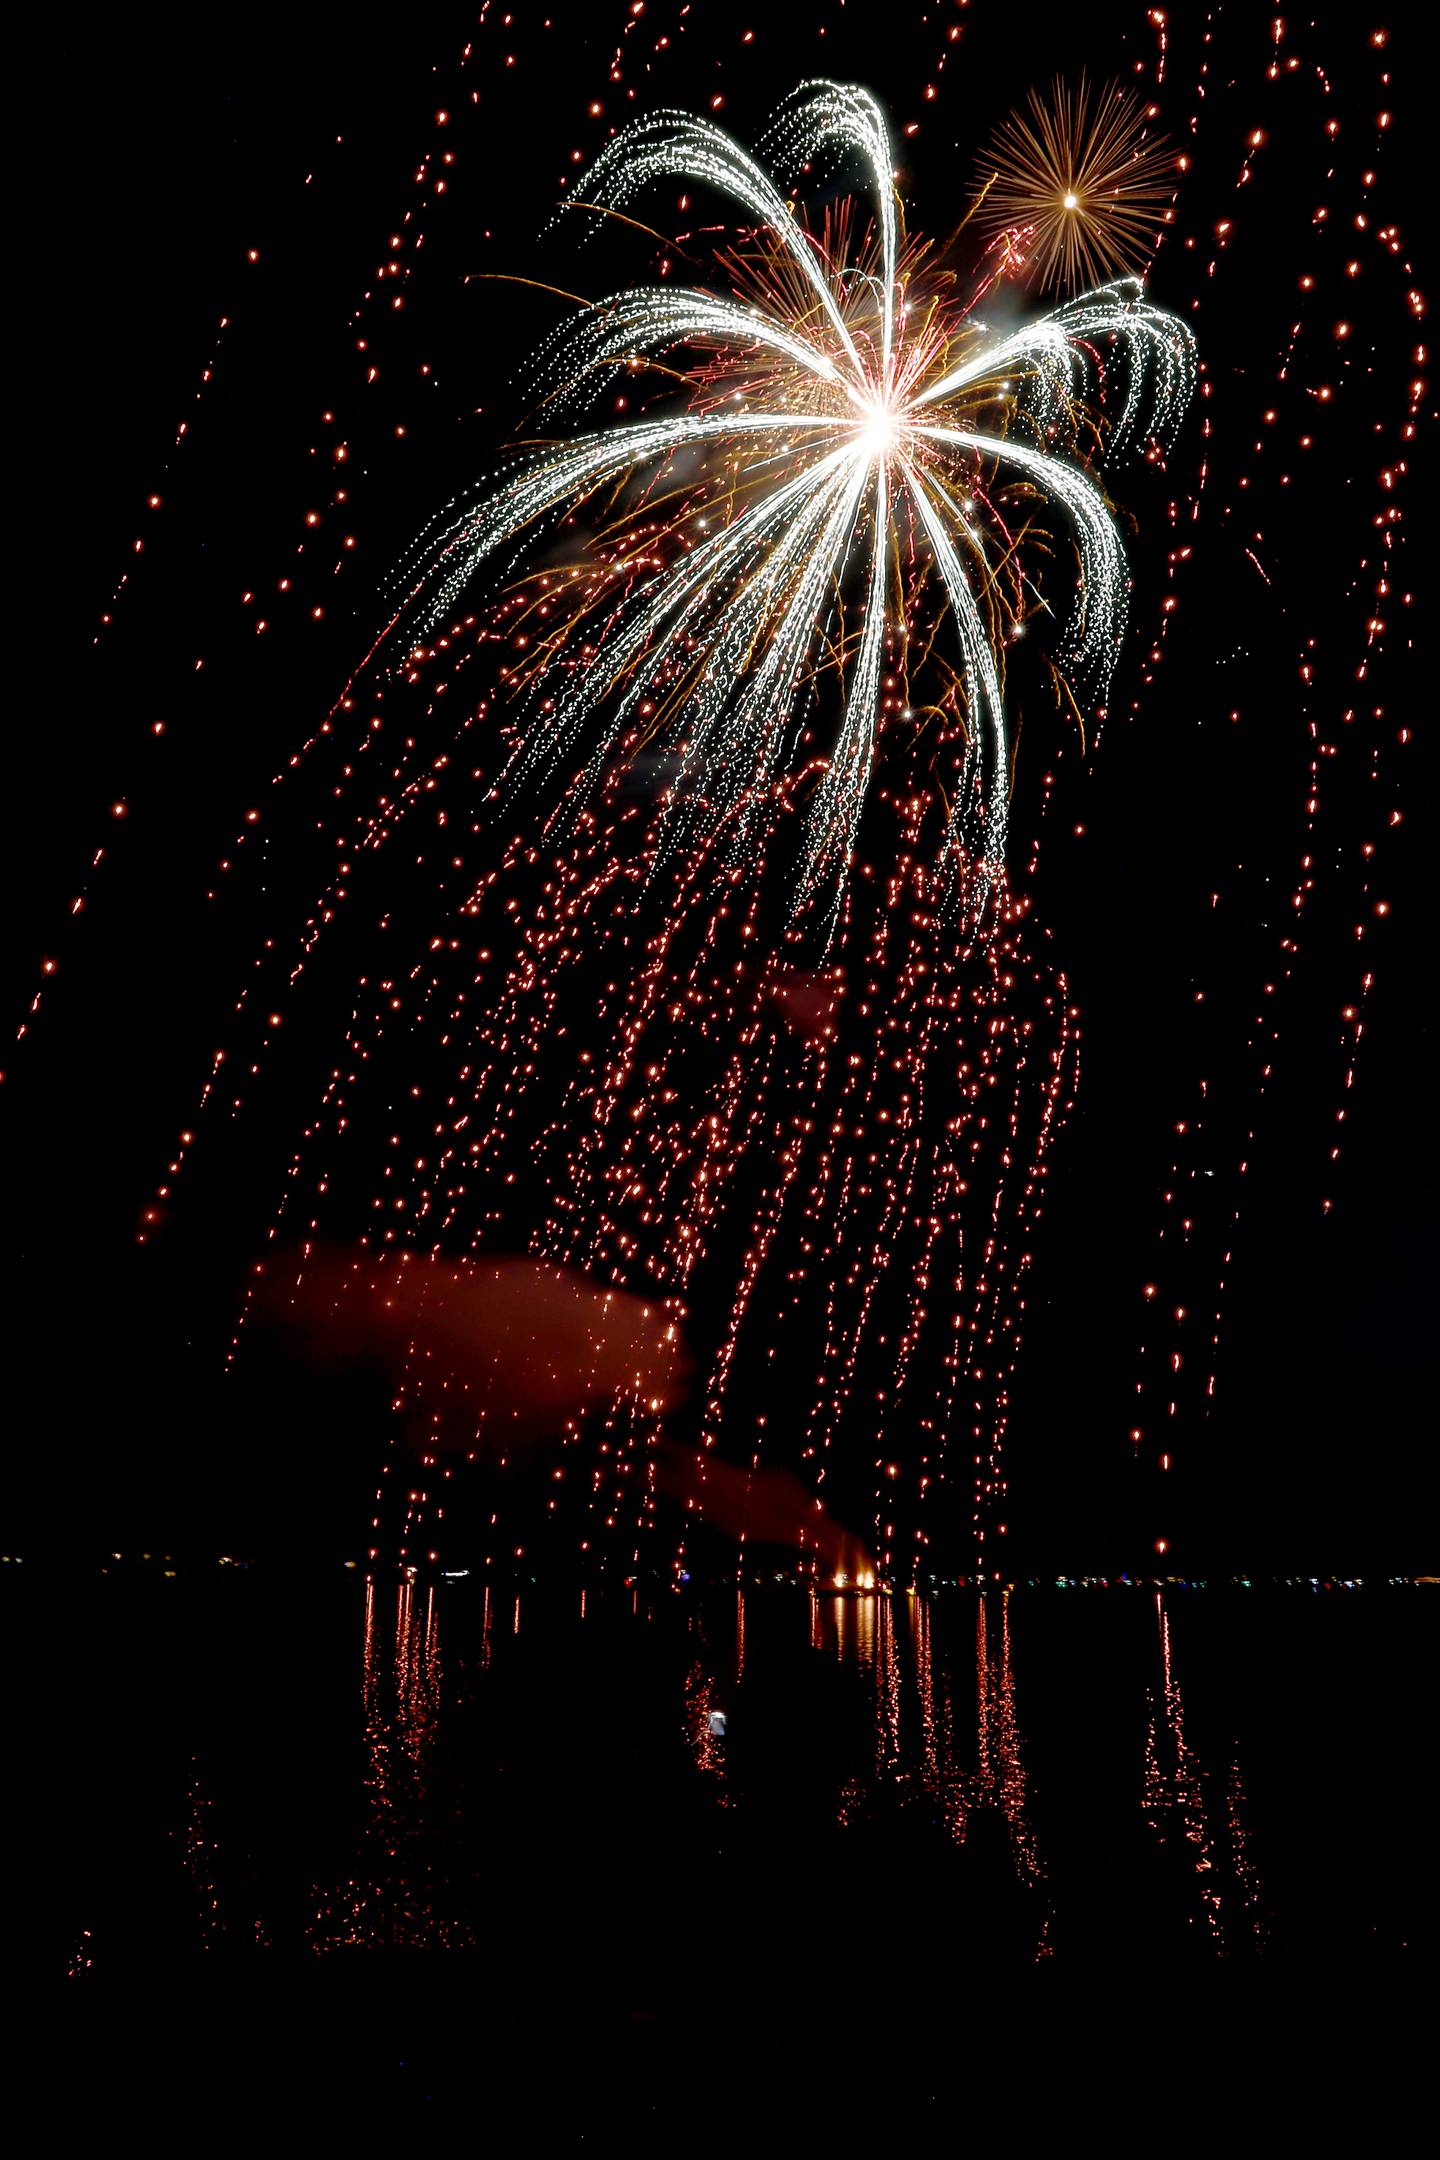 On Sunday, July 2, 2023, fireworks will light up the skies over Crystal Lake at Crystal Lake's Main Beach during Crystal Lake's annual Independence Day celebration.